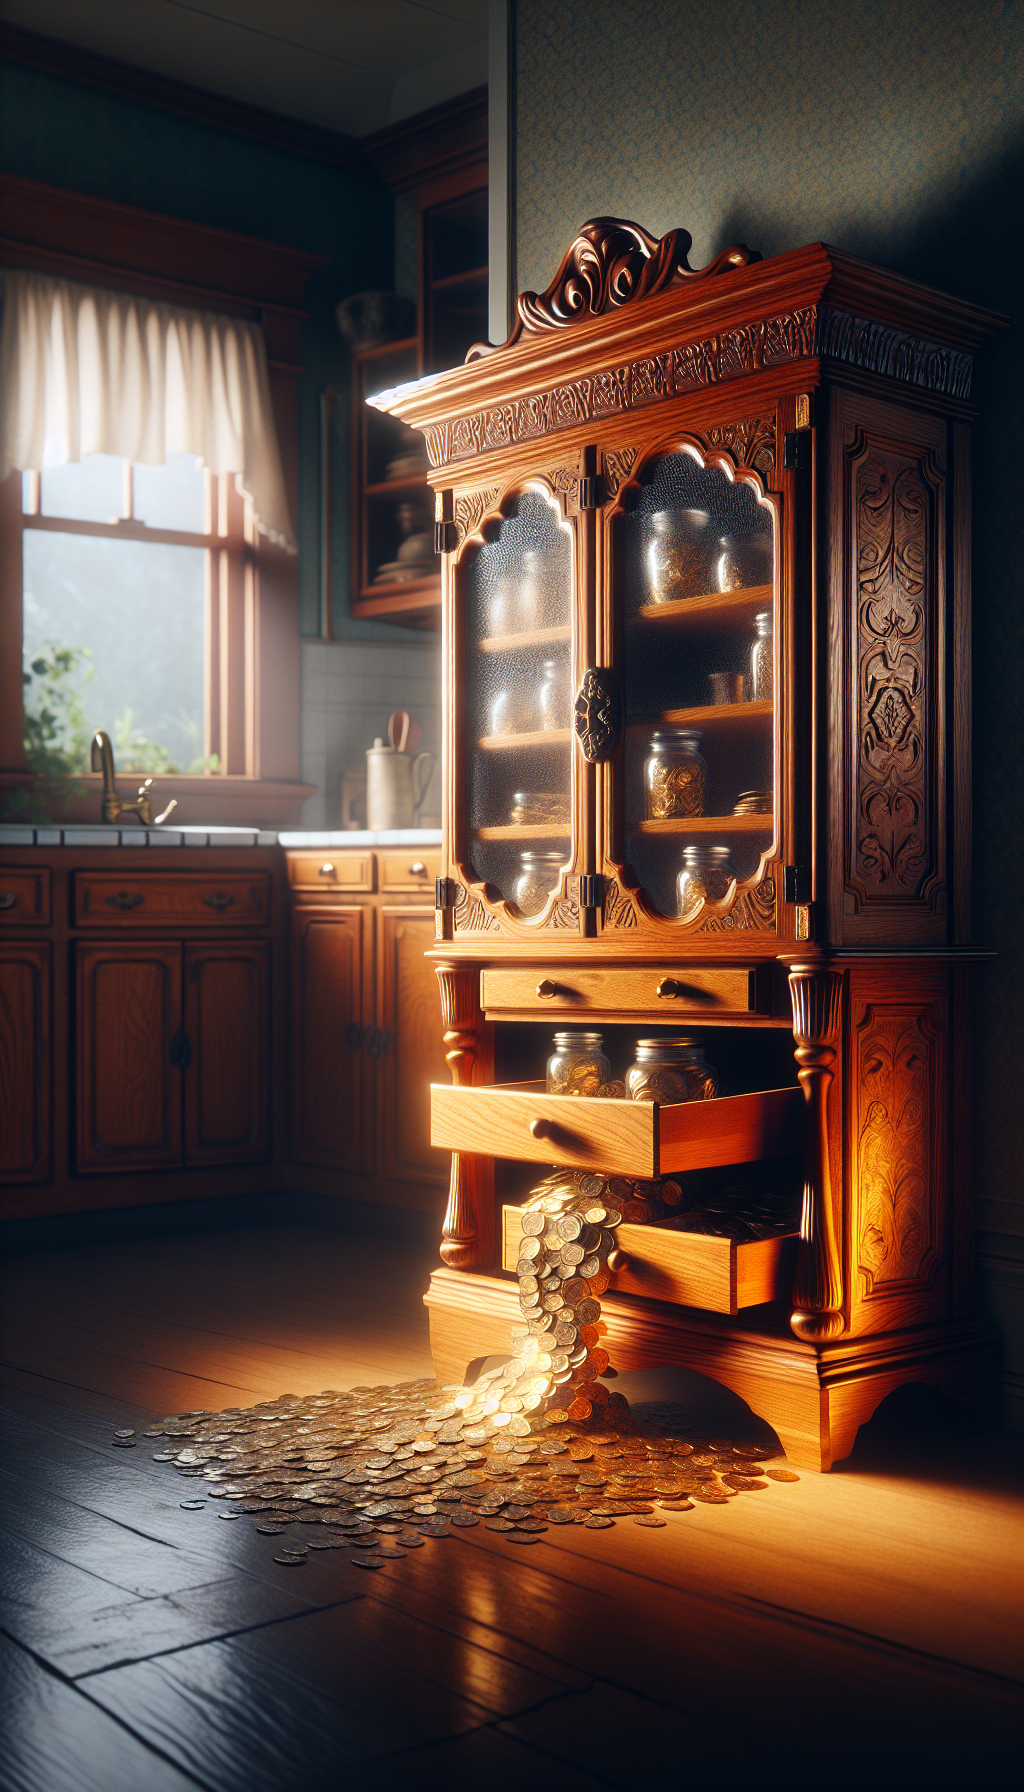 An illustration of a splendid, oak-built Hoosier cabinet standing proudly in a vintage kitchen setting, with ethereal light casting a warm glow on its intricate woodwork. The glass doors reflect visions of its storied past, while shimmering gold coins spill from its drawers, symbolizing the cabinet's enduring value to collectors and antique enthusiasts alike.